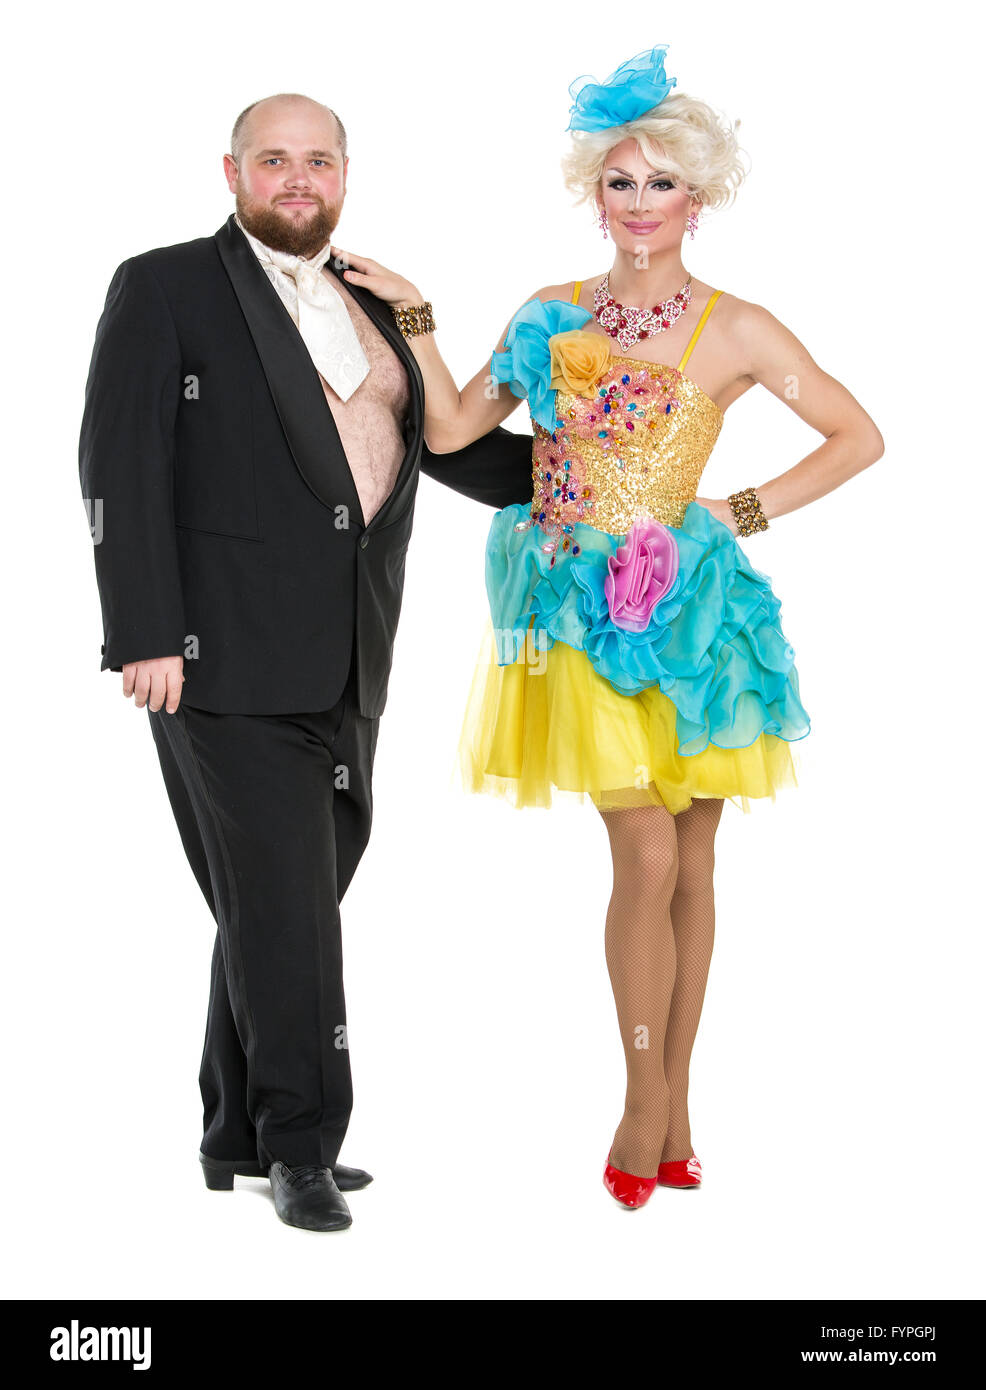 Eccentric Fat Man in a Tuxedo and Beautiful Lady in an Evening Dress Stock Photo